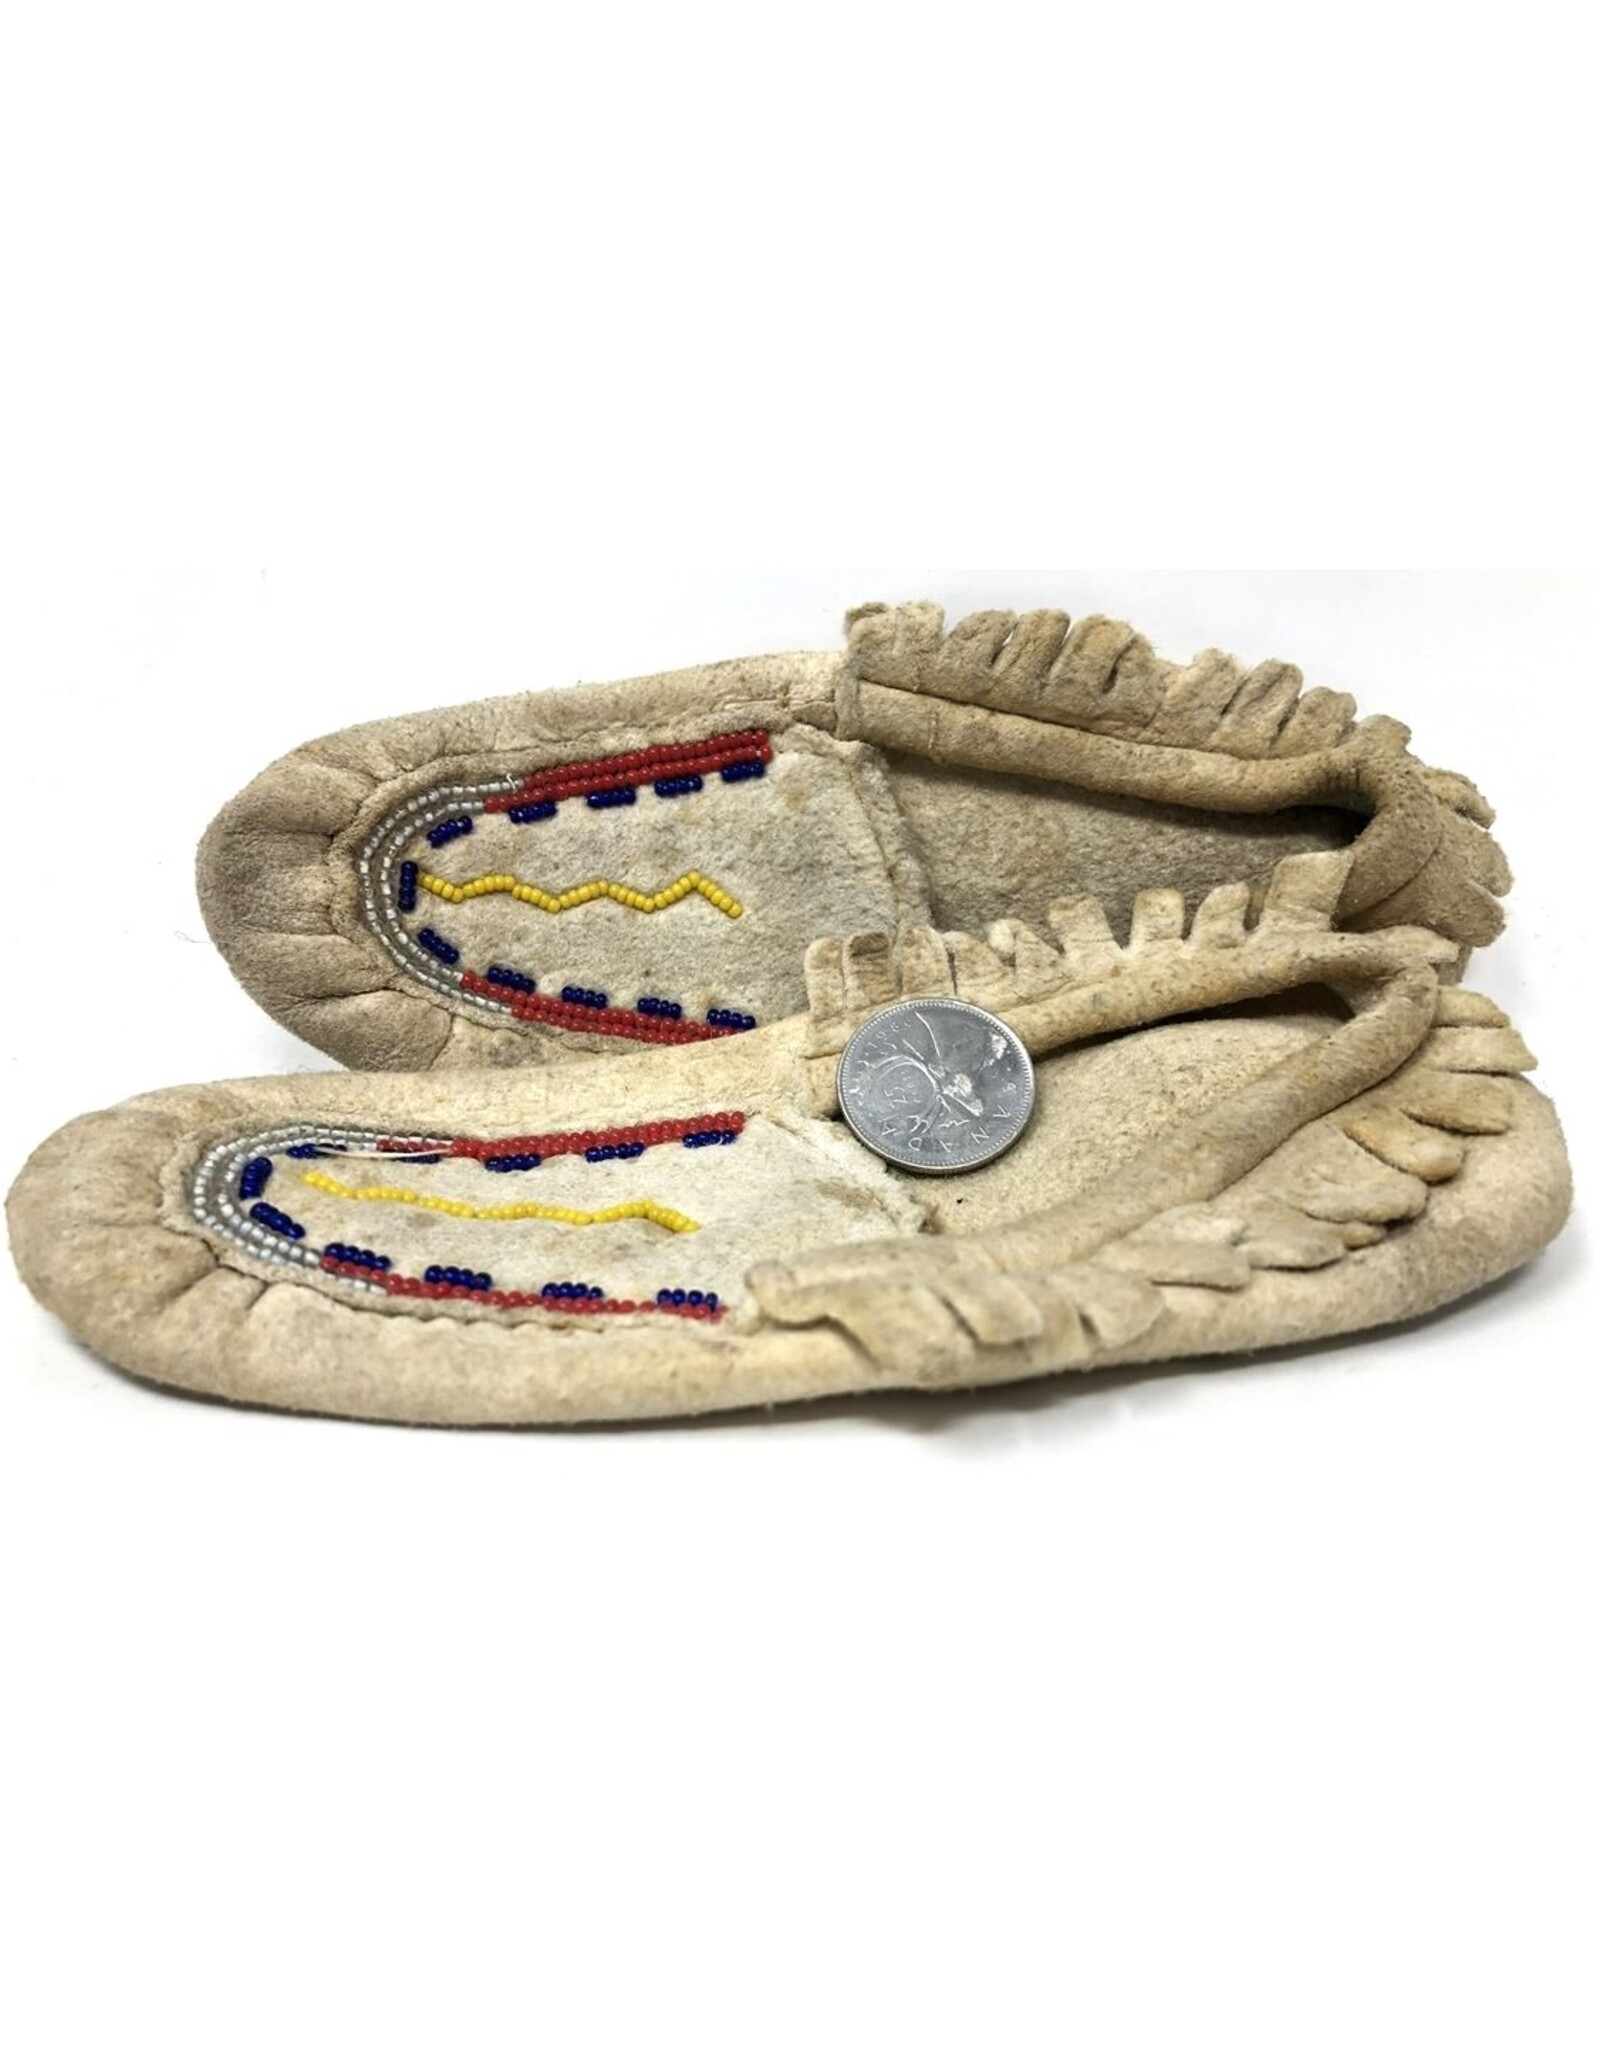 Moccasins - child's leather moccasins with simple beading